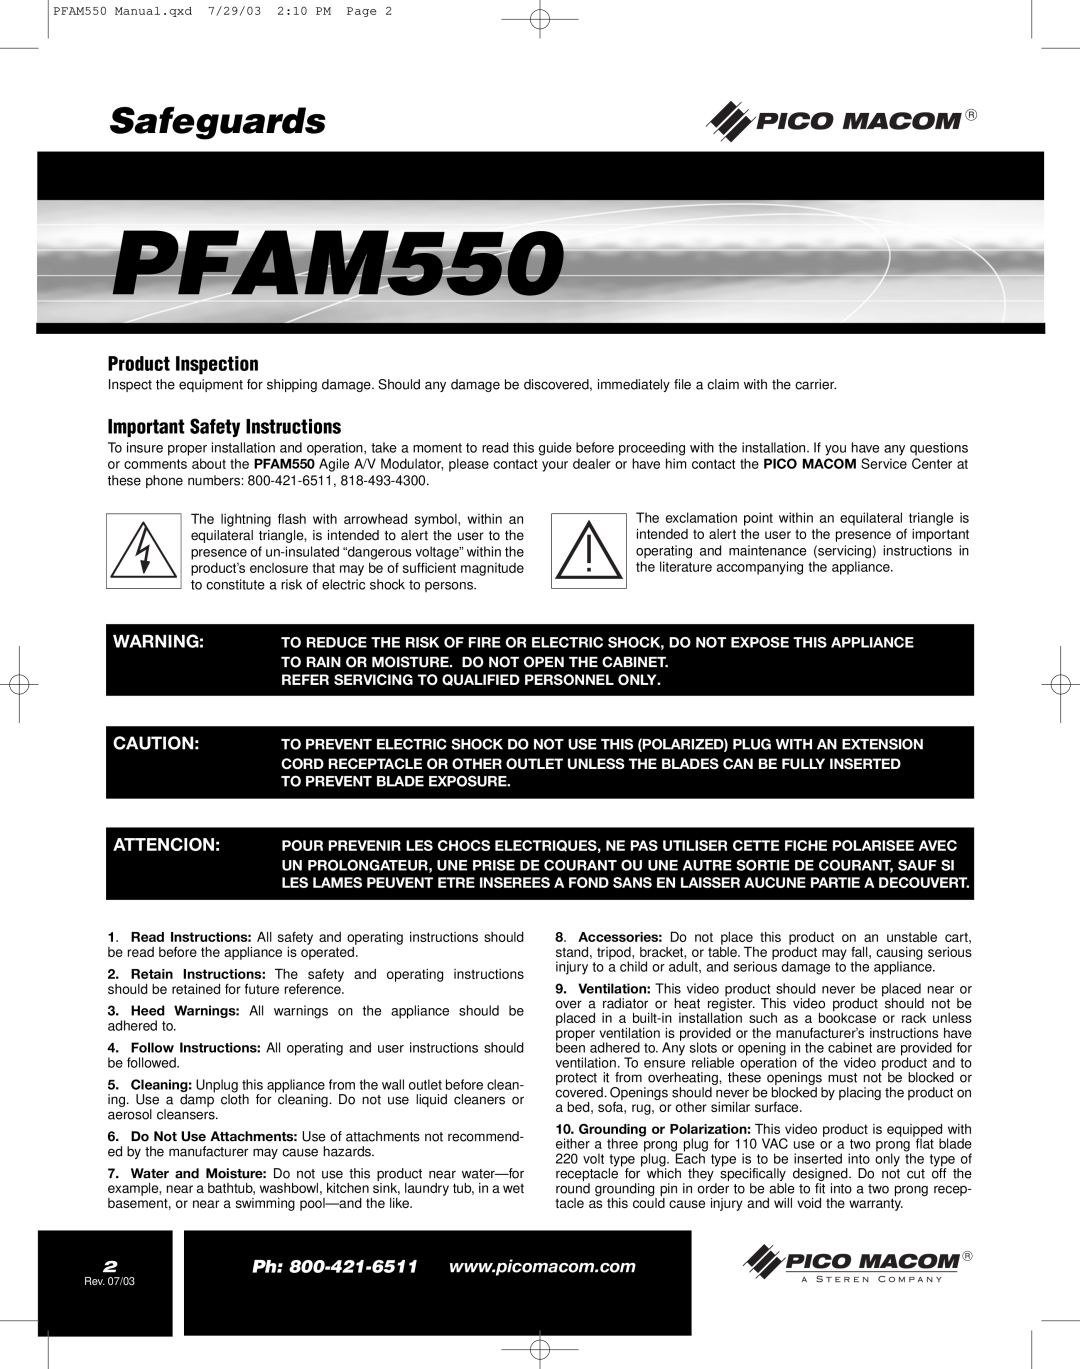 Pico Macom PFAM550 operation manual Safeguards, Product Inspection, Important Safety Instructions 